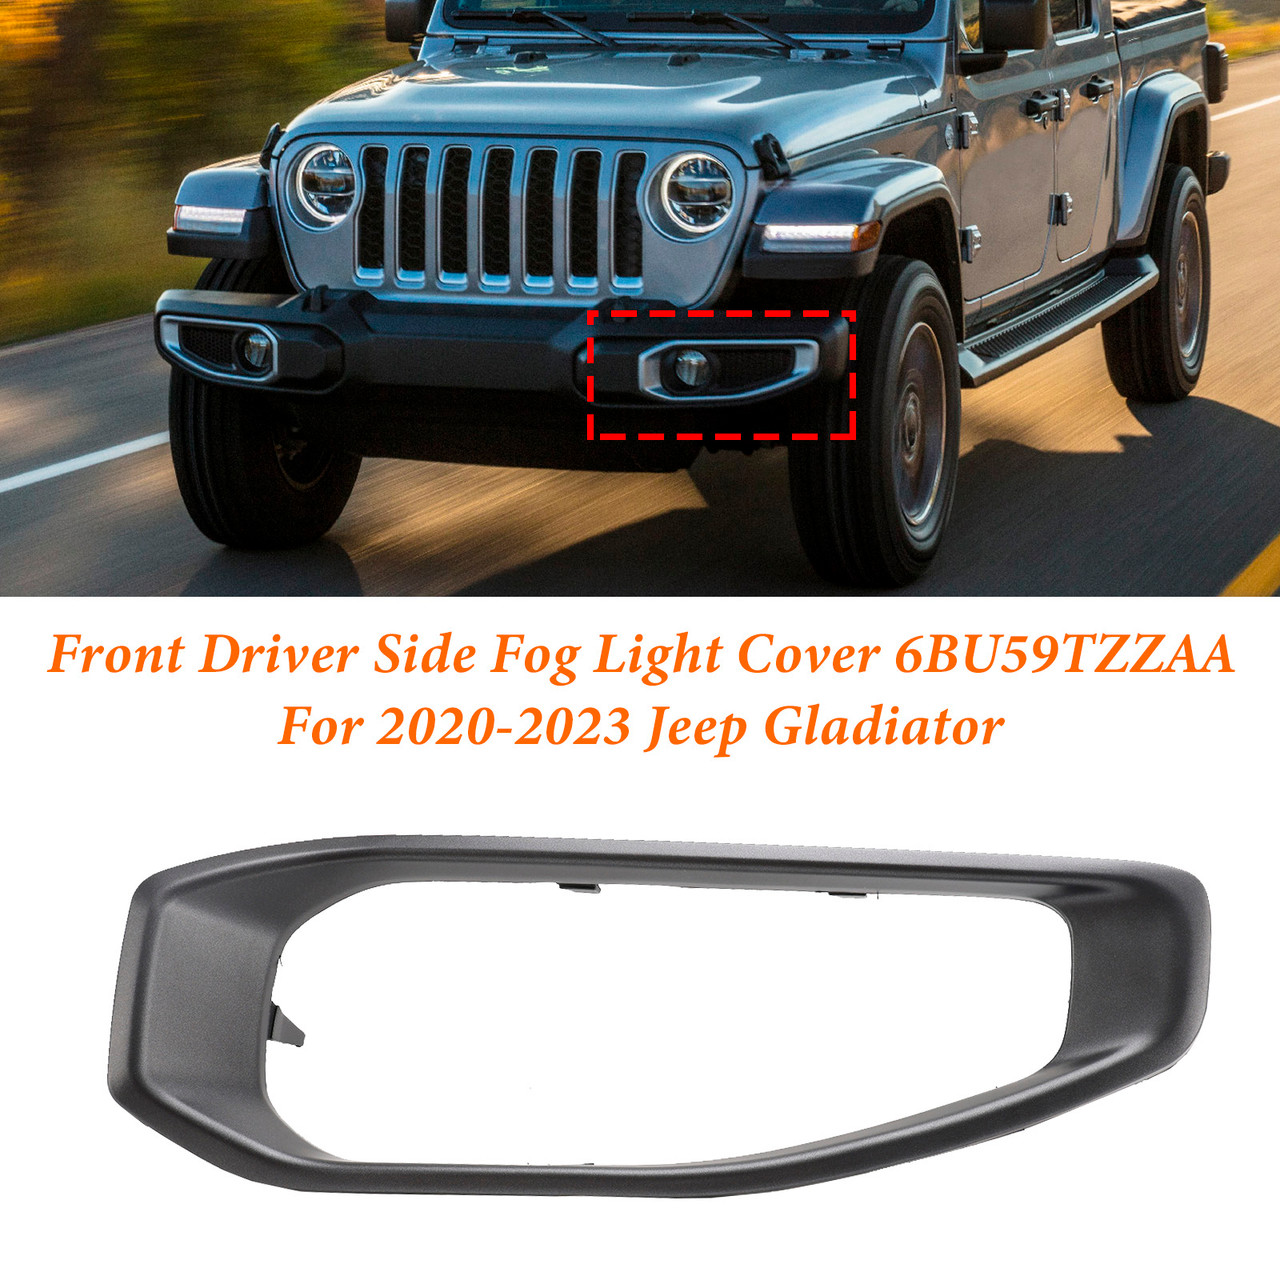 Front Driver Side Fog Light Trim 6BU59TZZAA For Jeep Gladiator 2020-2023